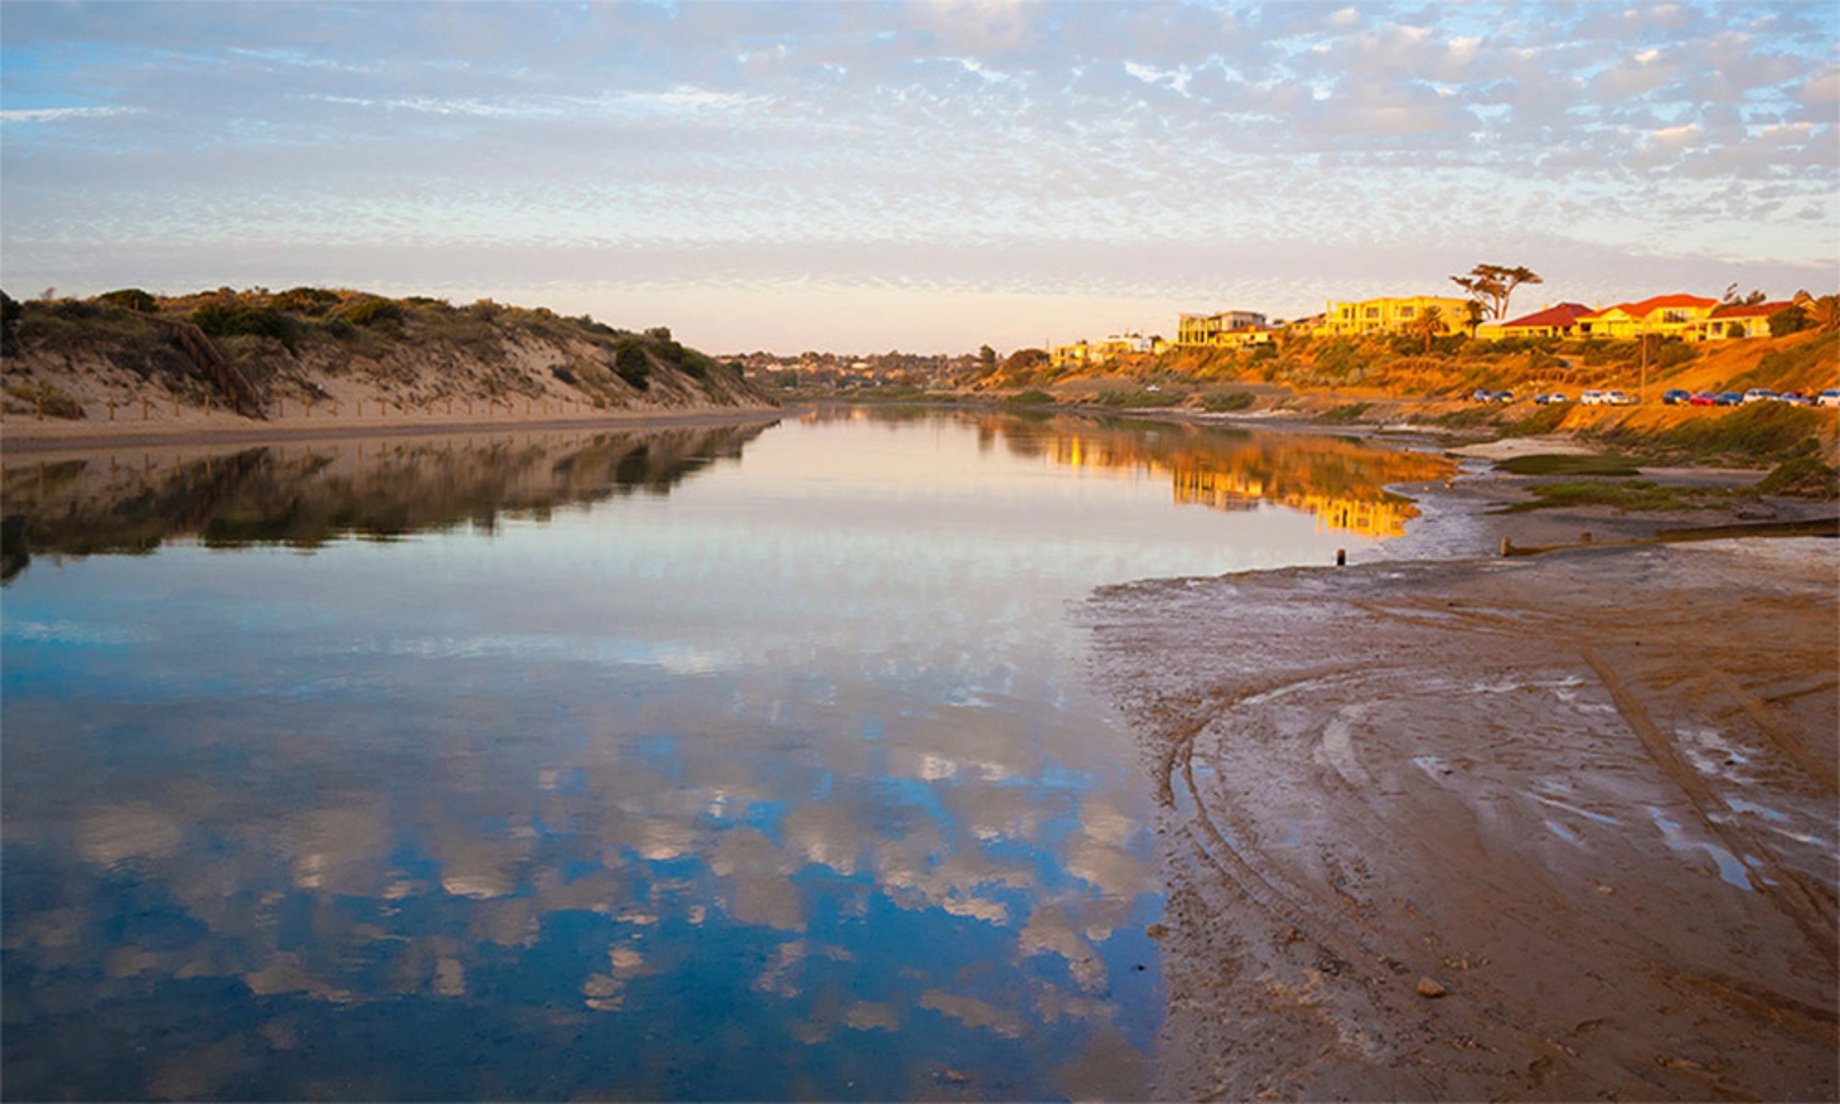 River bed near homes in South Australia